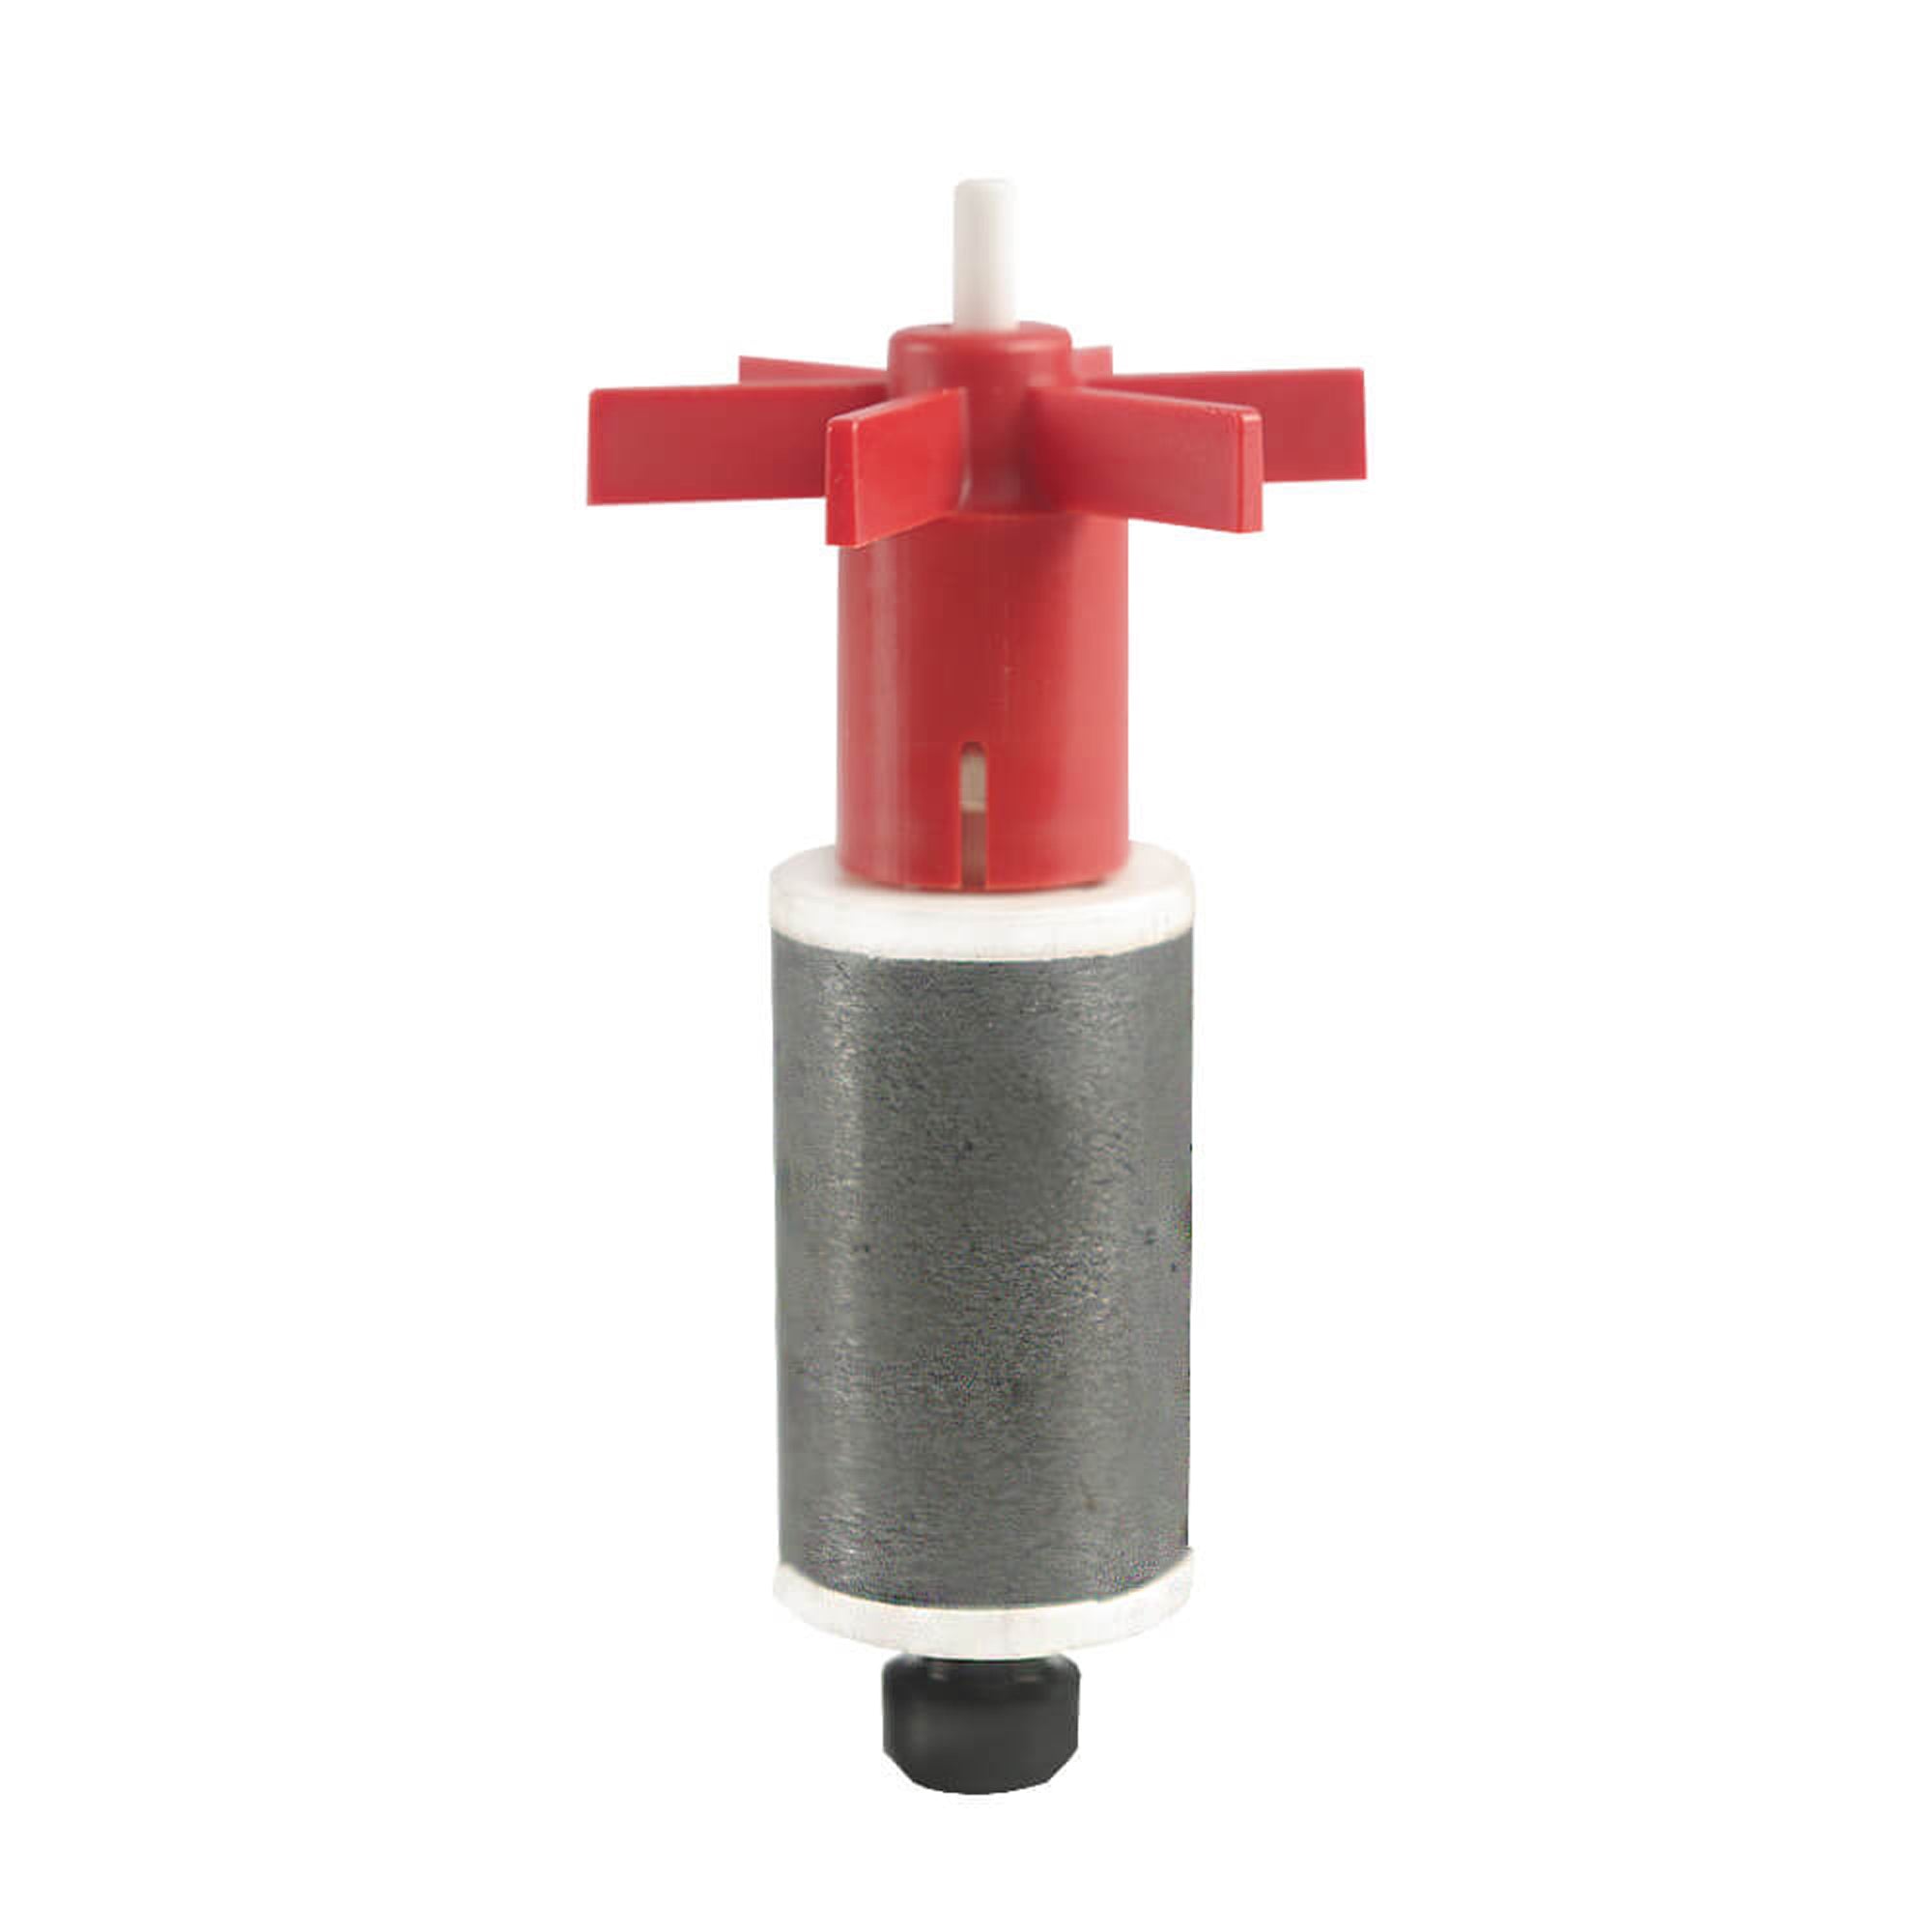 Fluval Replacement Magnetic Impeller with Ceramic Shaft & Rubber Bushing for 307 Filter